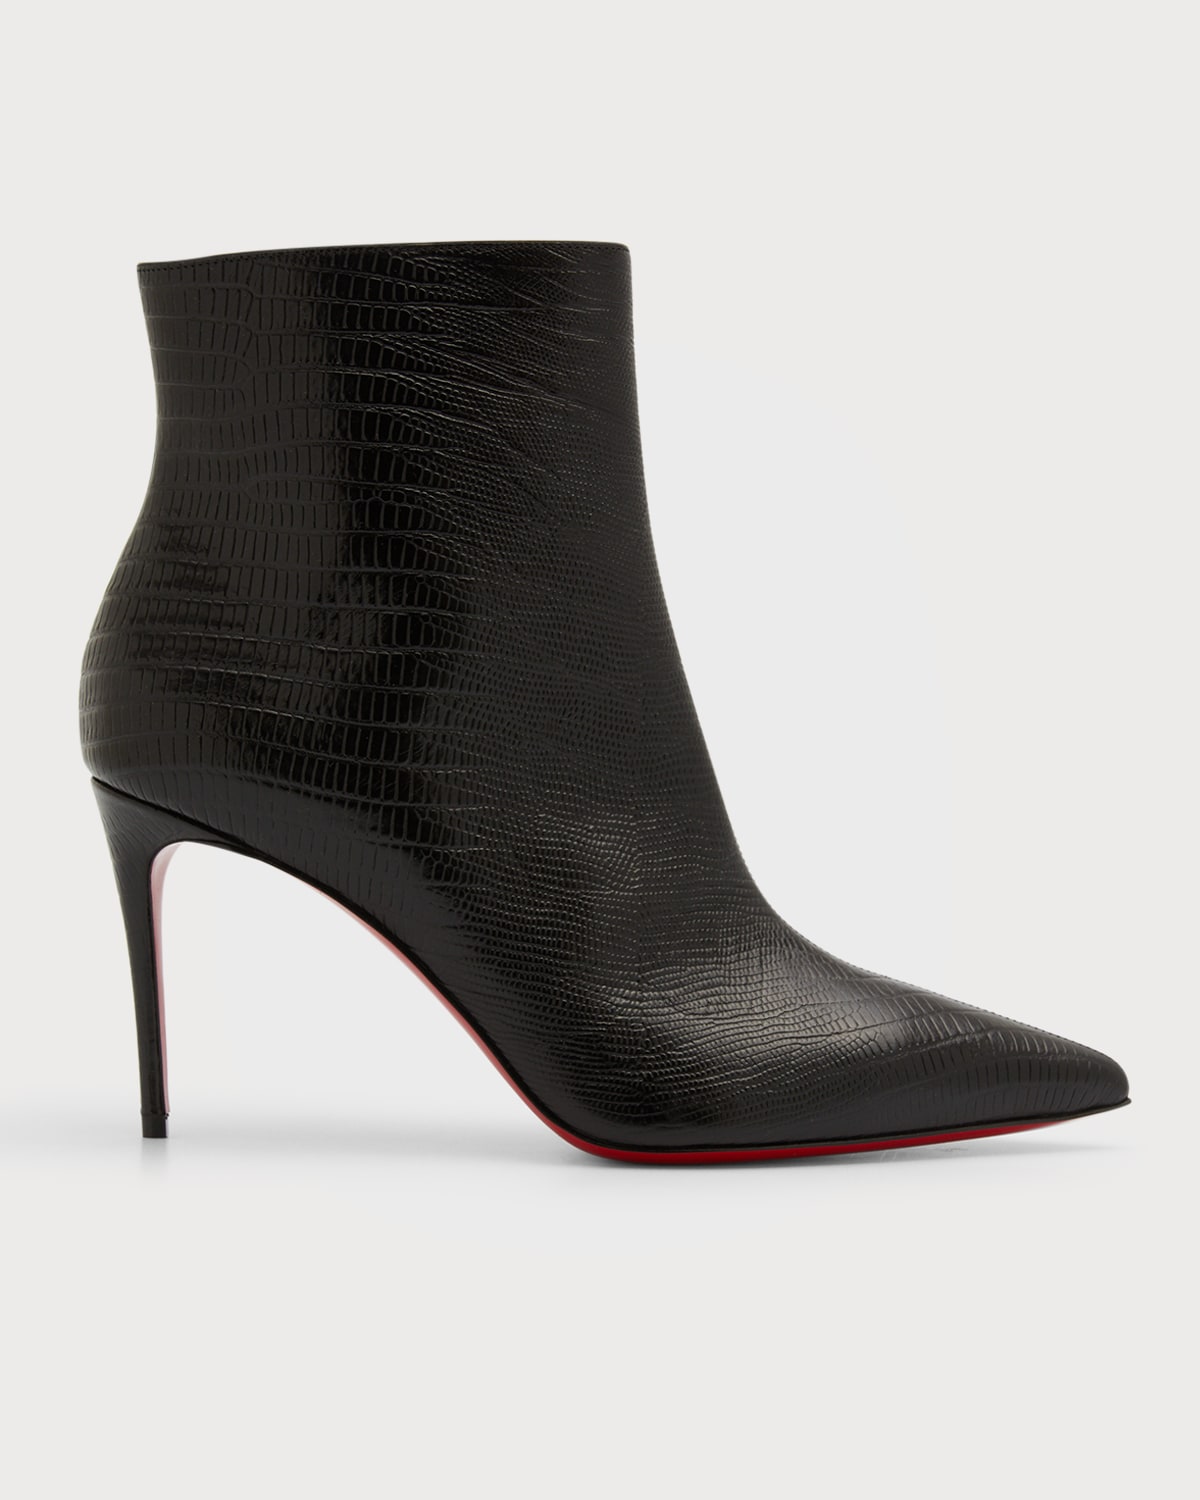 Christian Louboutin So Kate Embossed Red Sole Booties